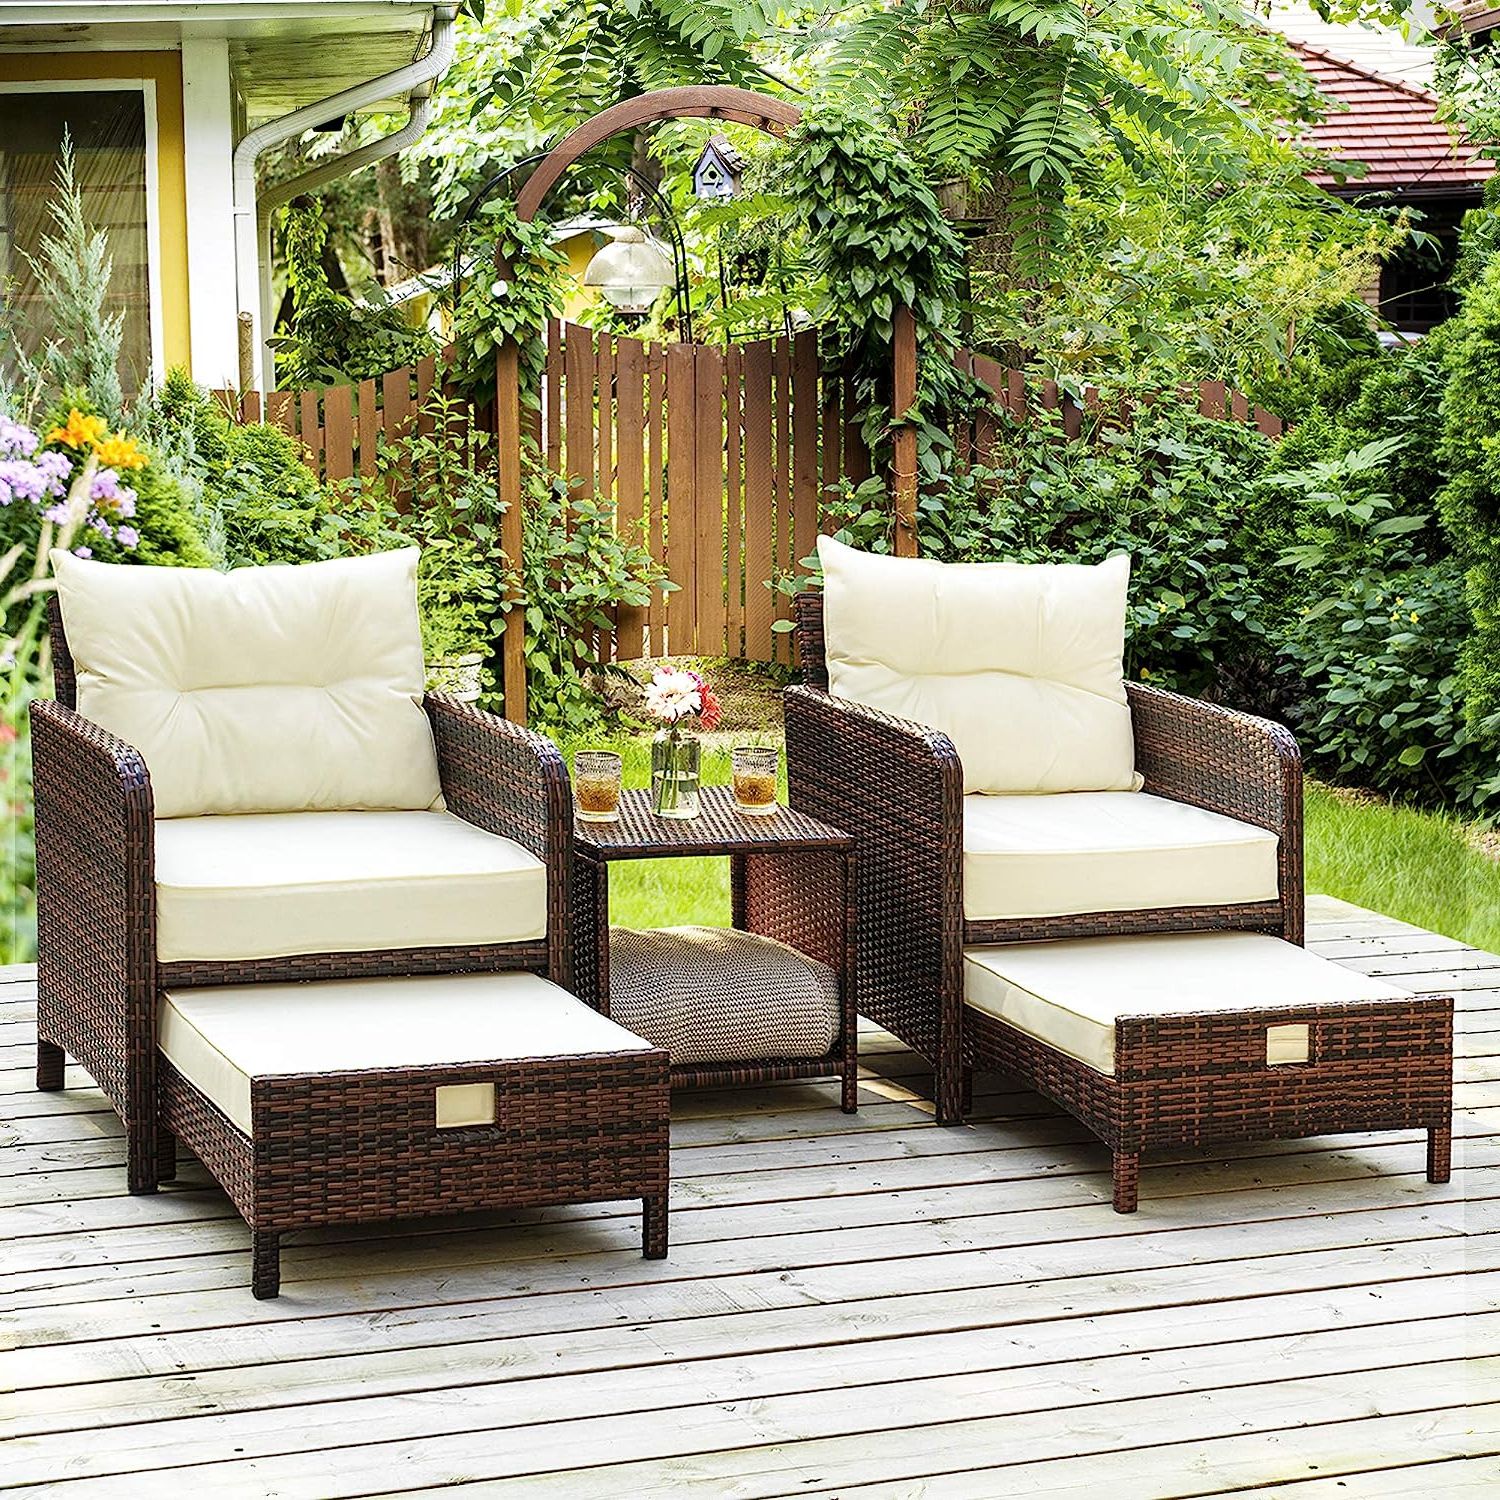 5 Piece Patio Furniture Set With Regard To Most Recent Pamapic 5 Pieces Wicker Patio Furniture Set Outdoor (Photo 3 of 15)